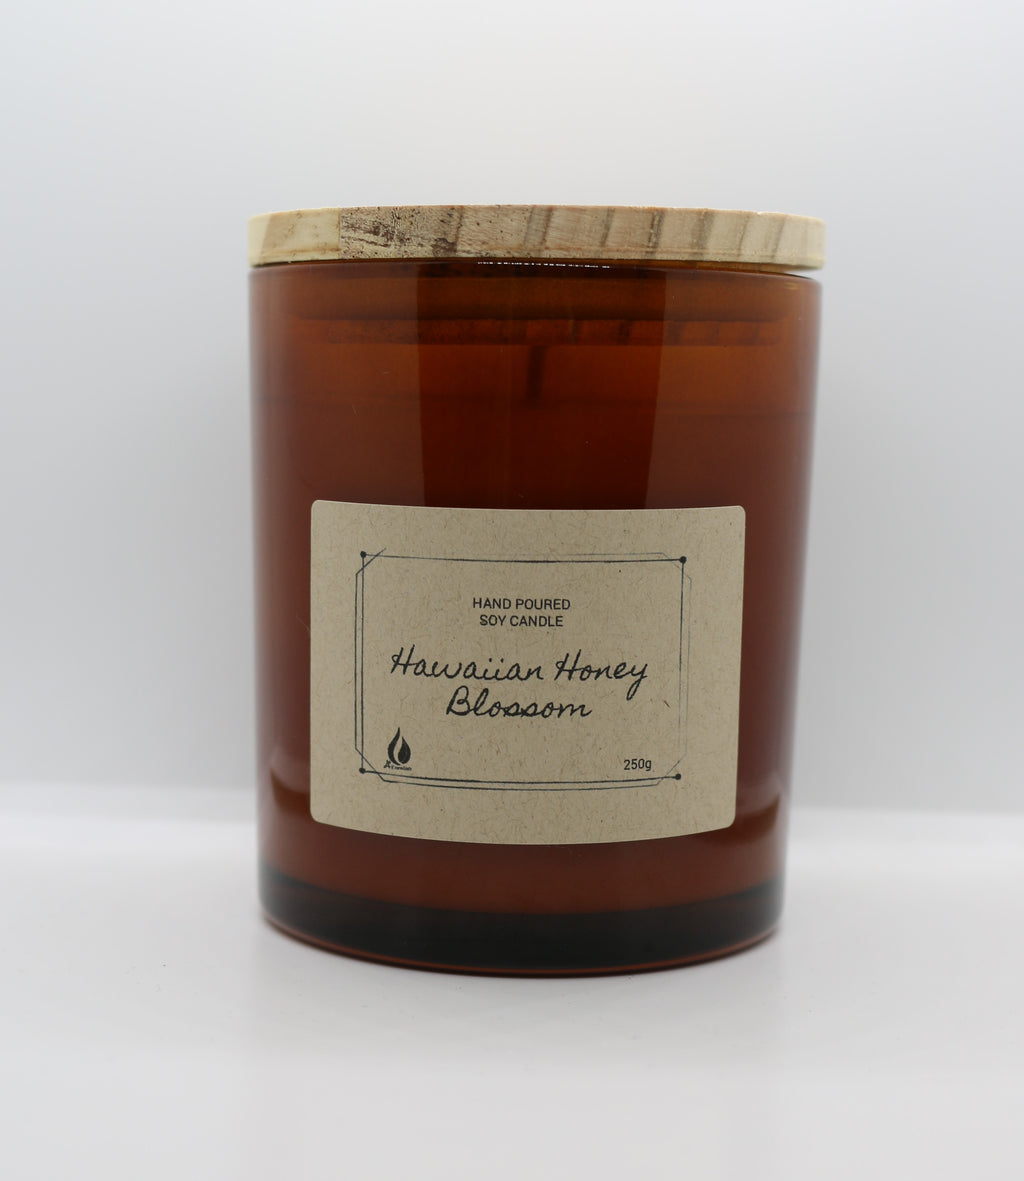 HAWAIIAN HONEY BLOSSOM - Hand Poured Soy Candle A+ Essentials Pty Ltd